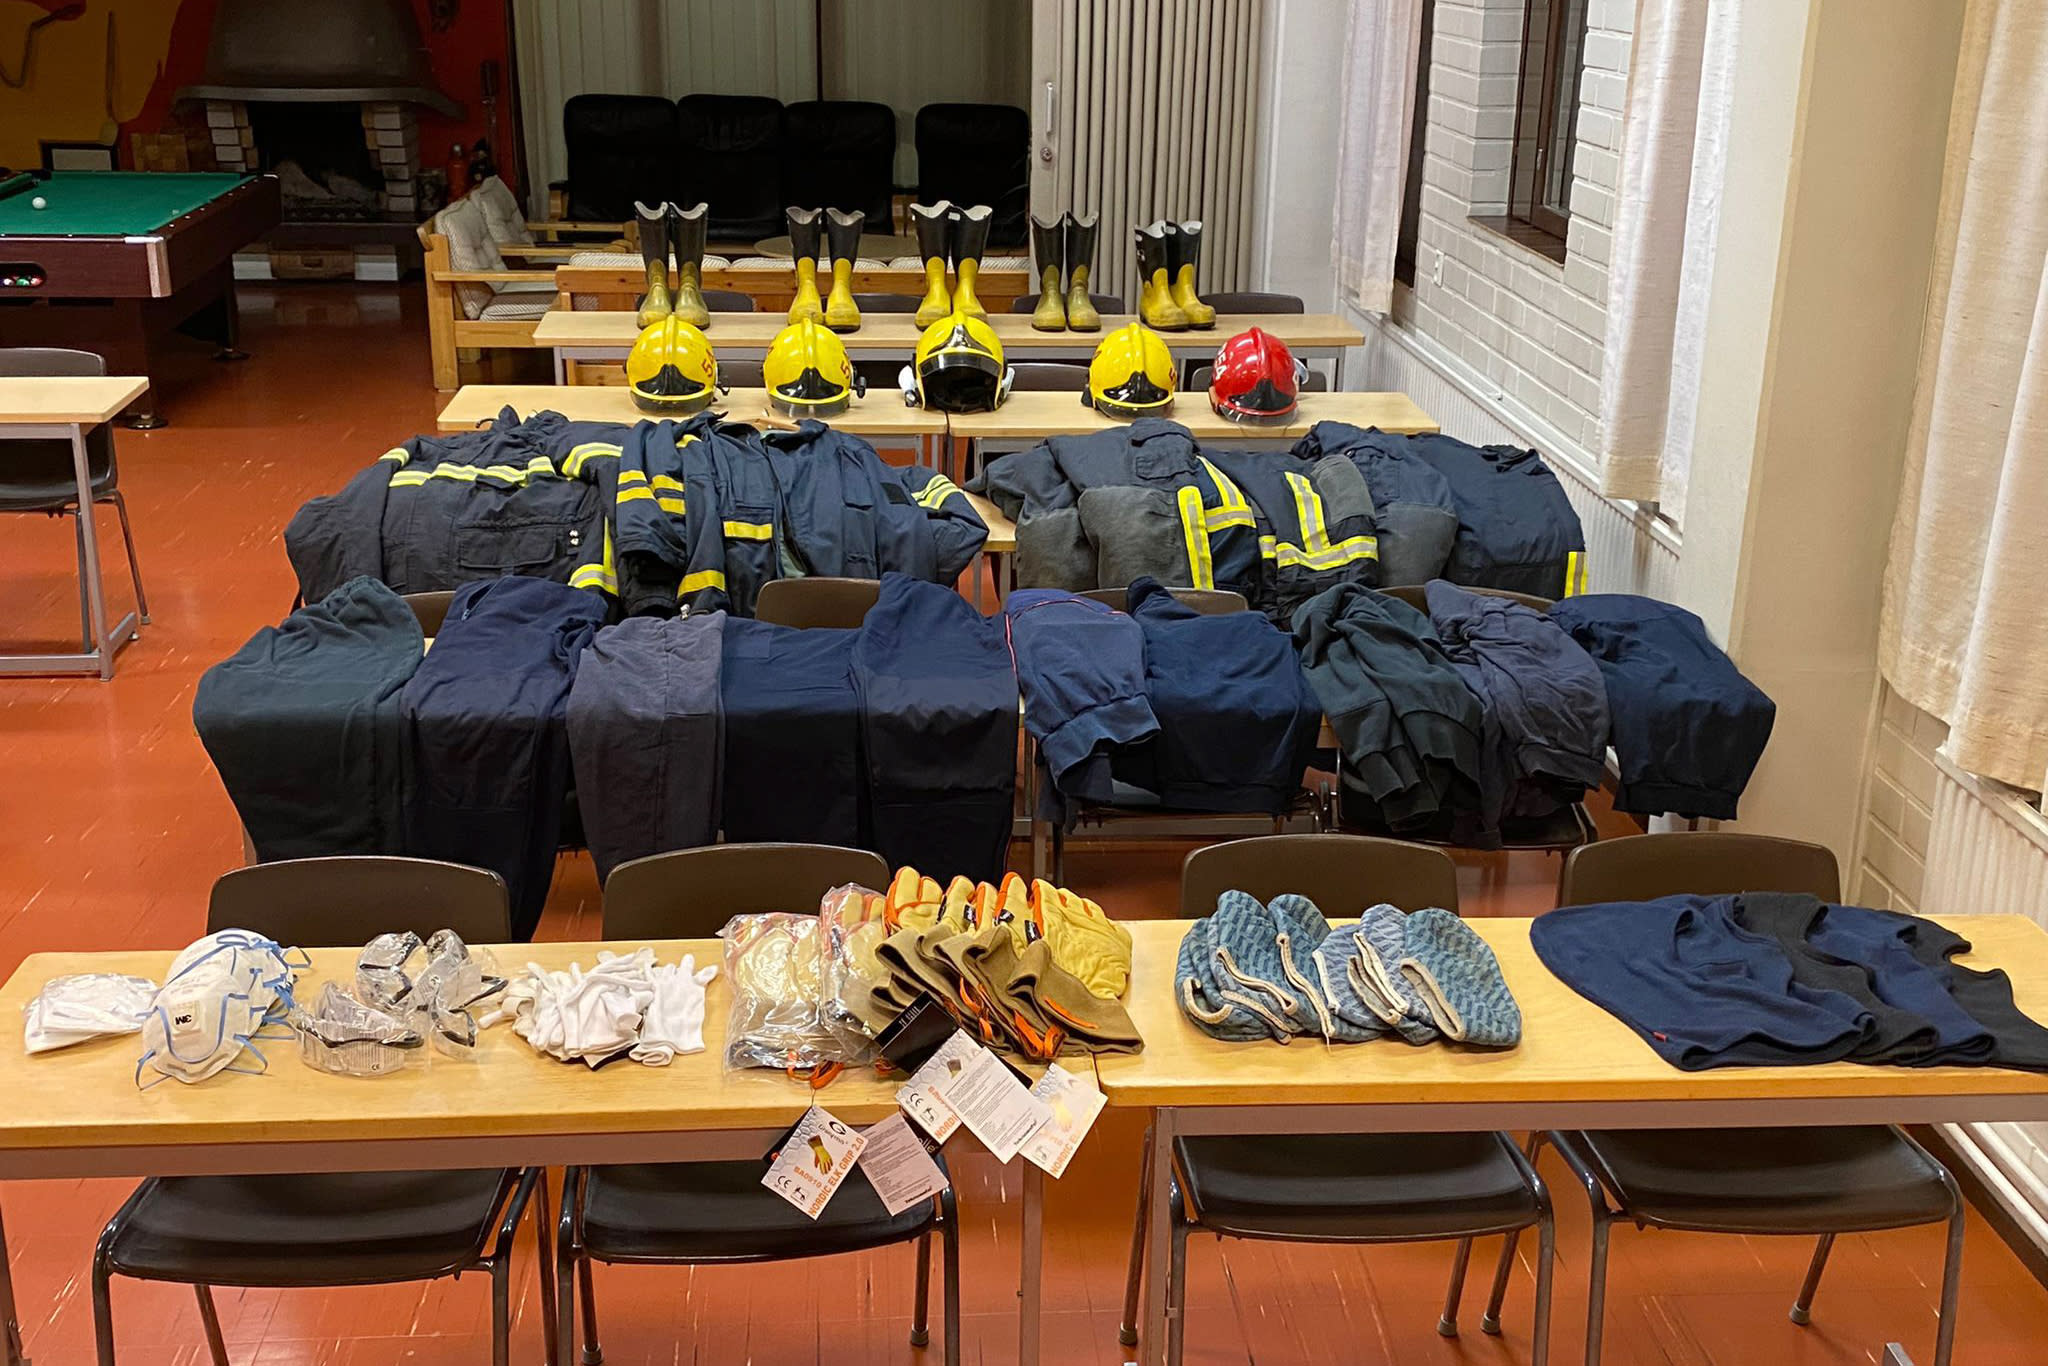 Finnish firefighters donate equipment to Ukrainian colleagues